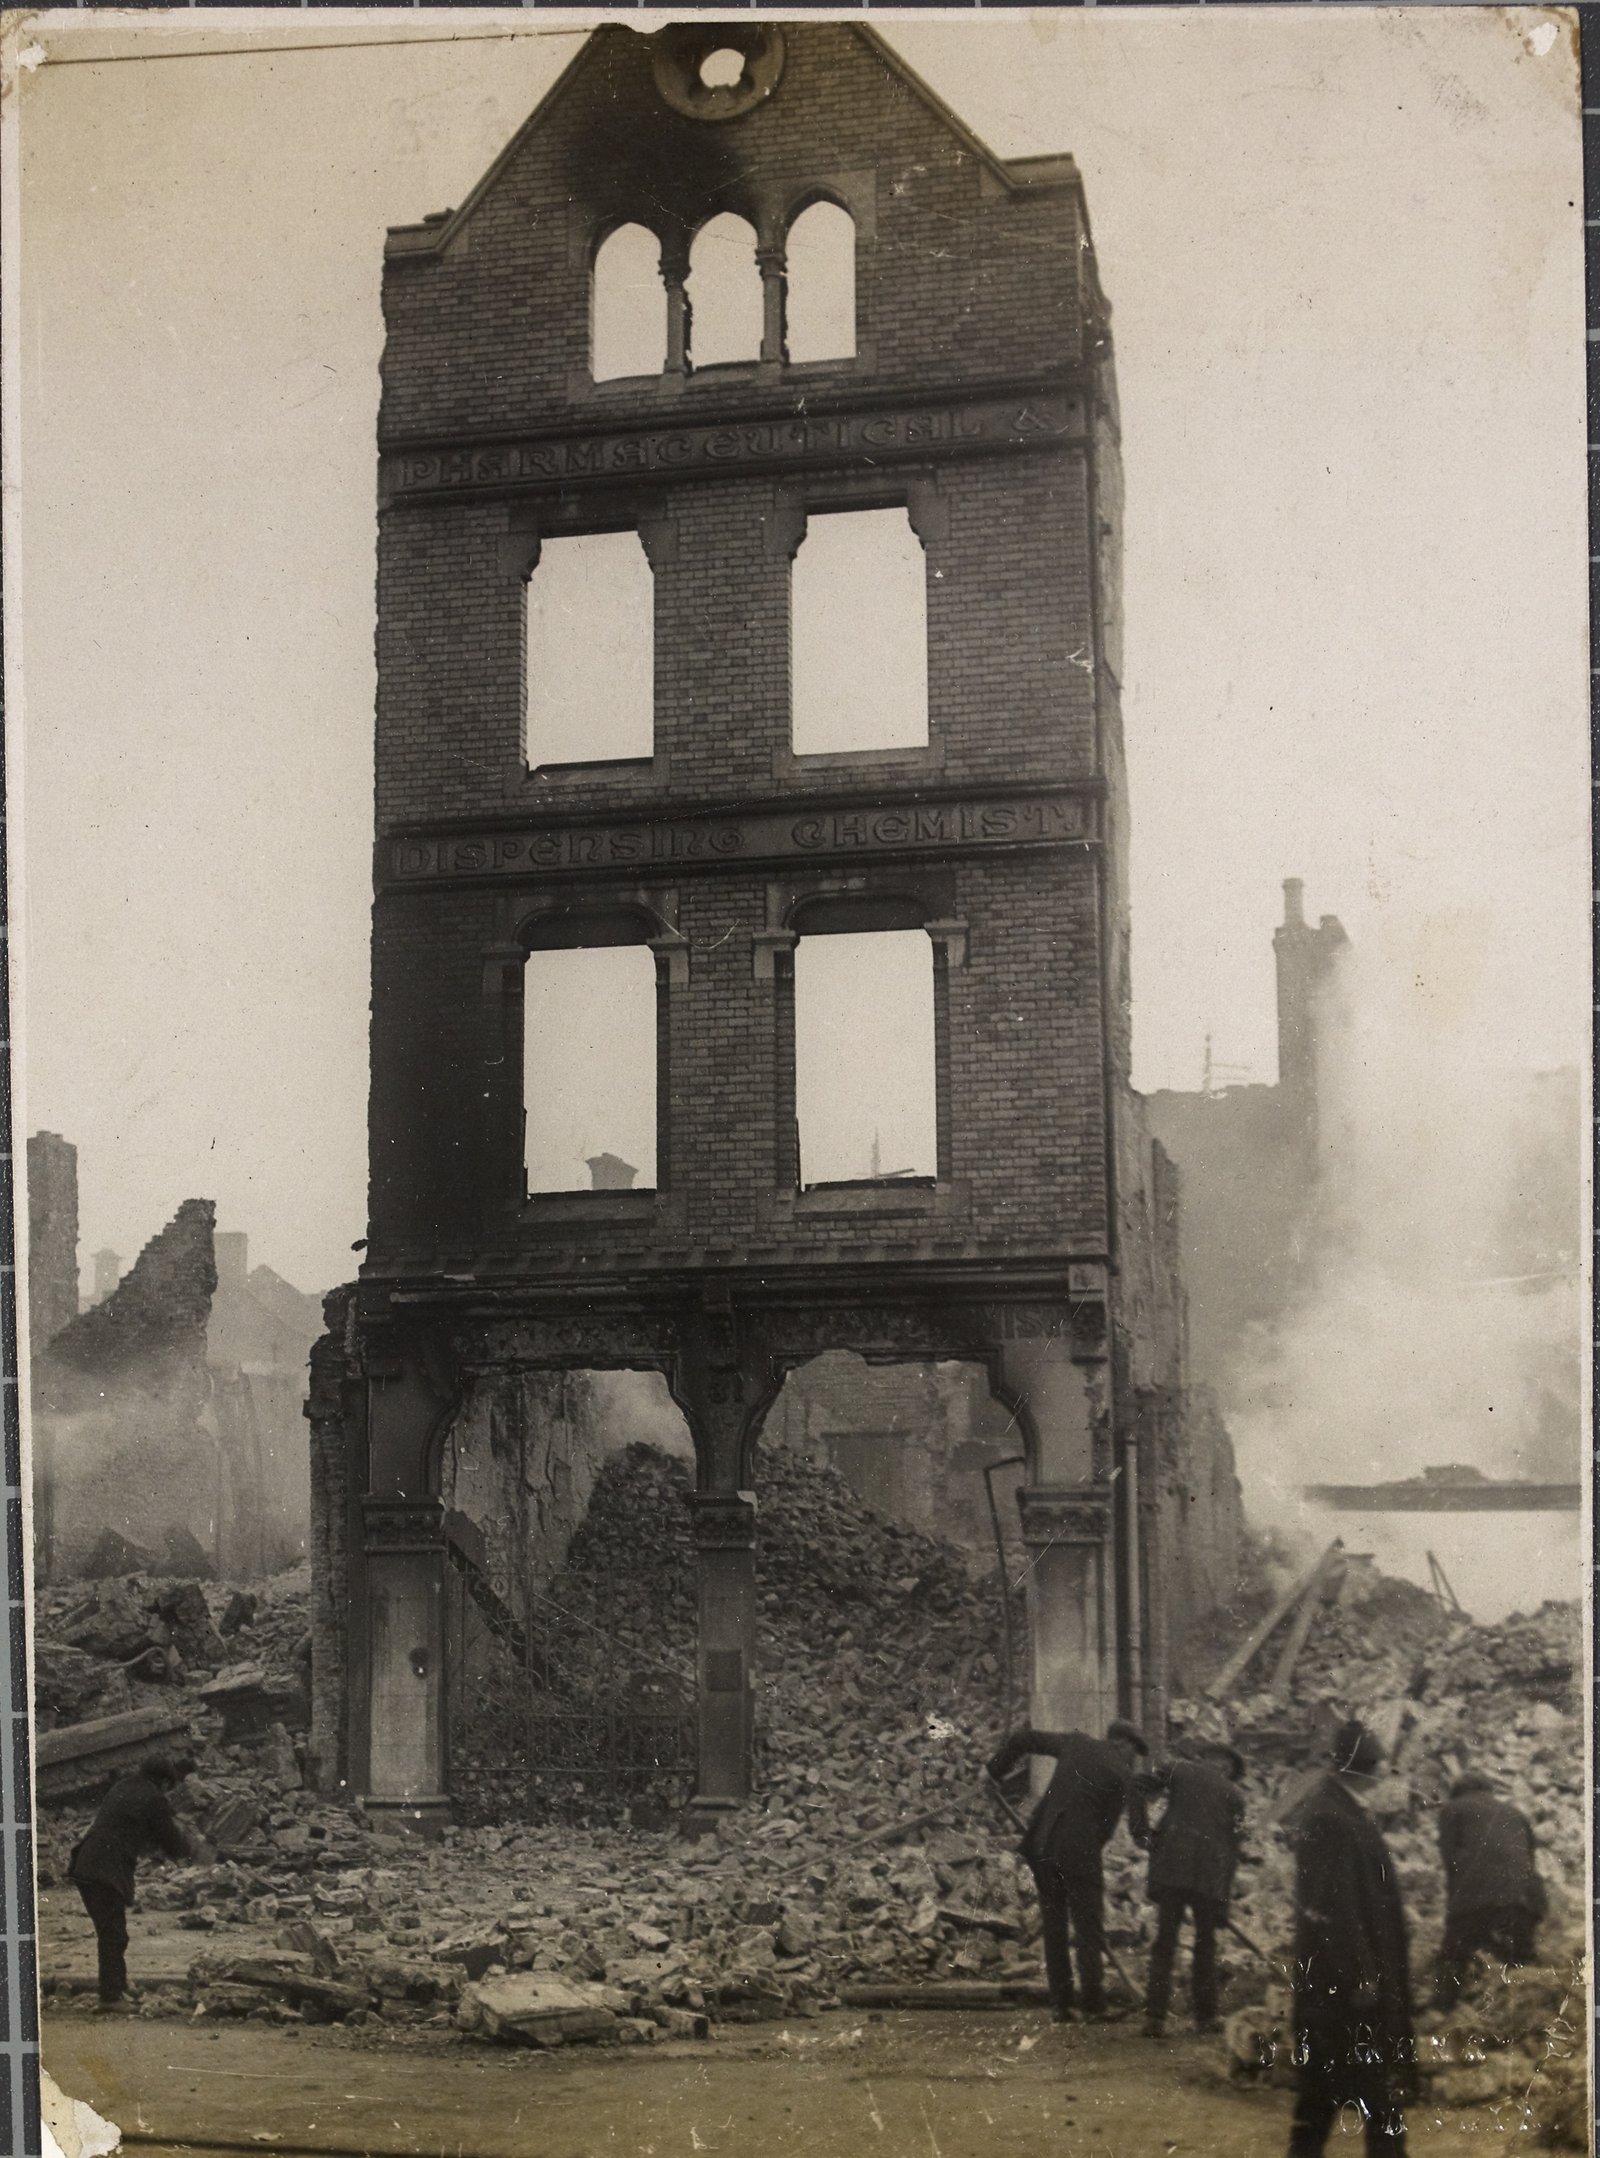 Image - The remains of Sunner's Pharmaceutical and Dispensing Chemist, 31 Patrick Street, Cork as they were on 13th December 1920. Image courtesy of the National Library of Ireland